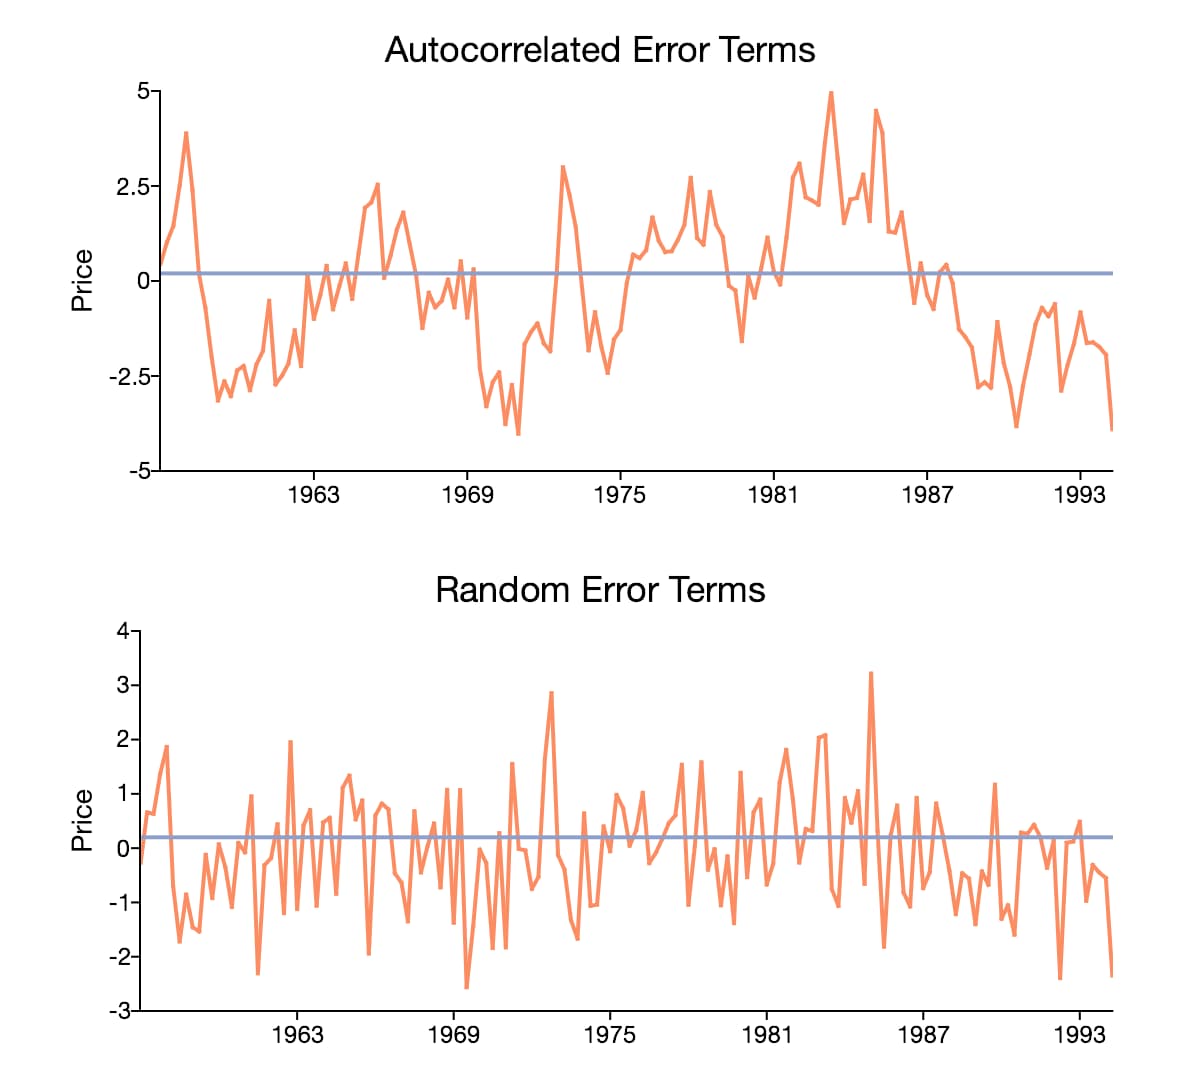 Comparison of error terms with autocorrelation and without.